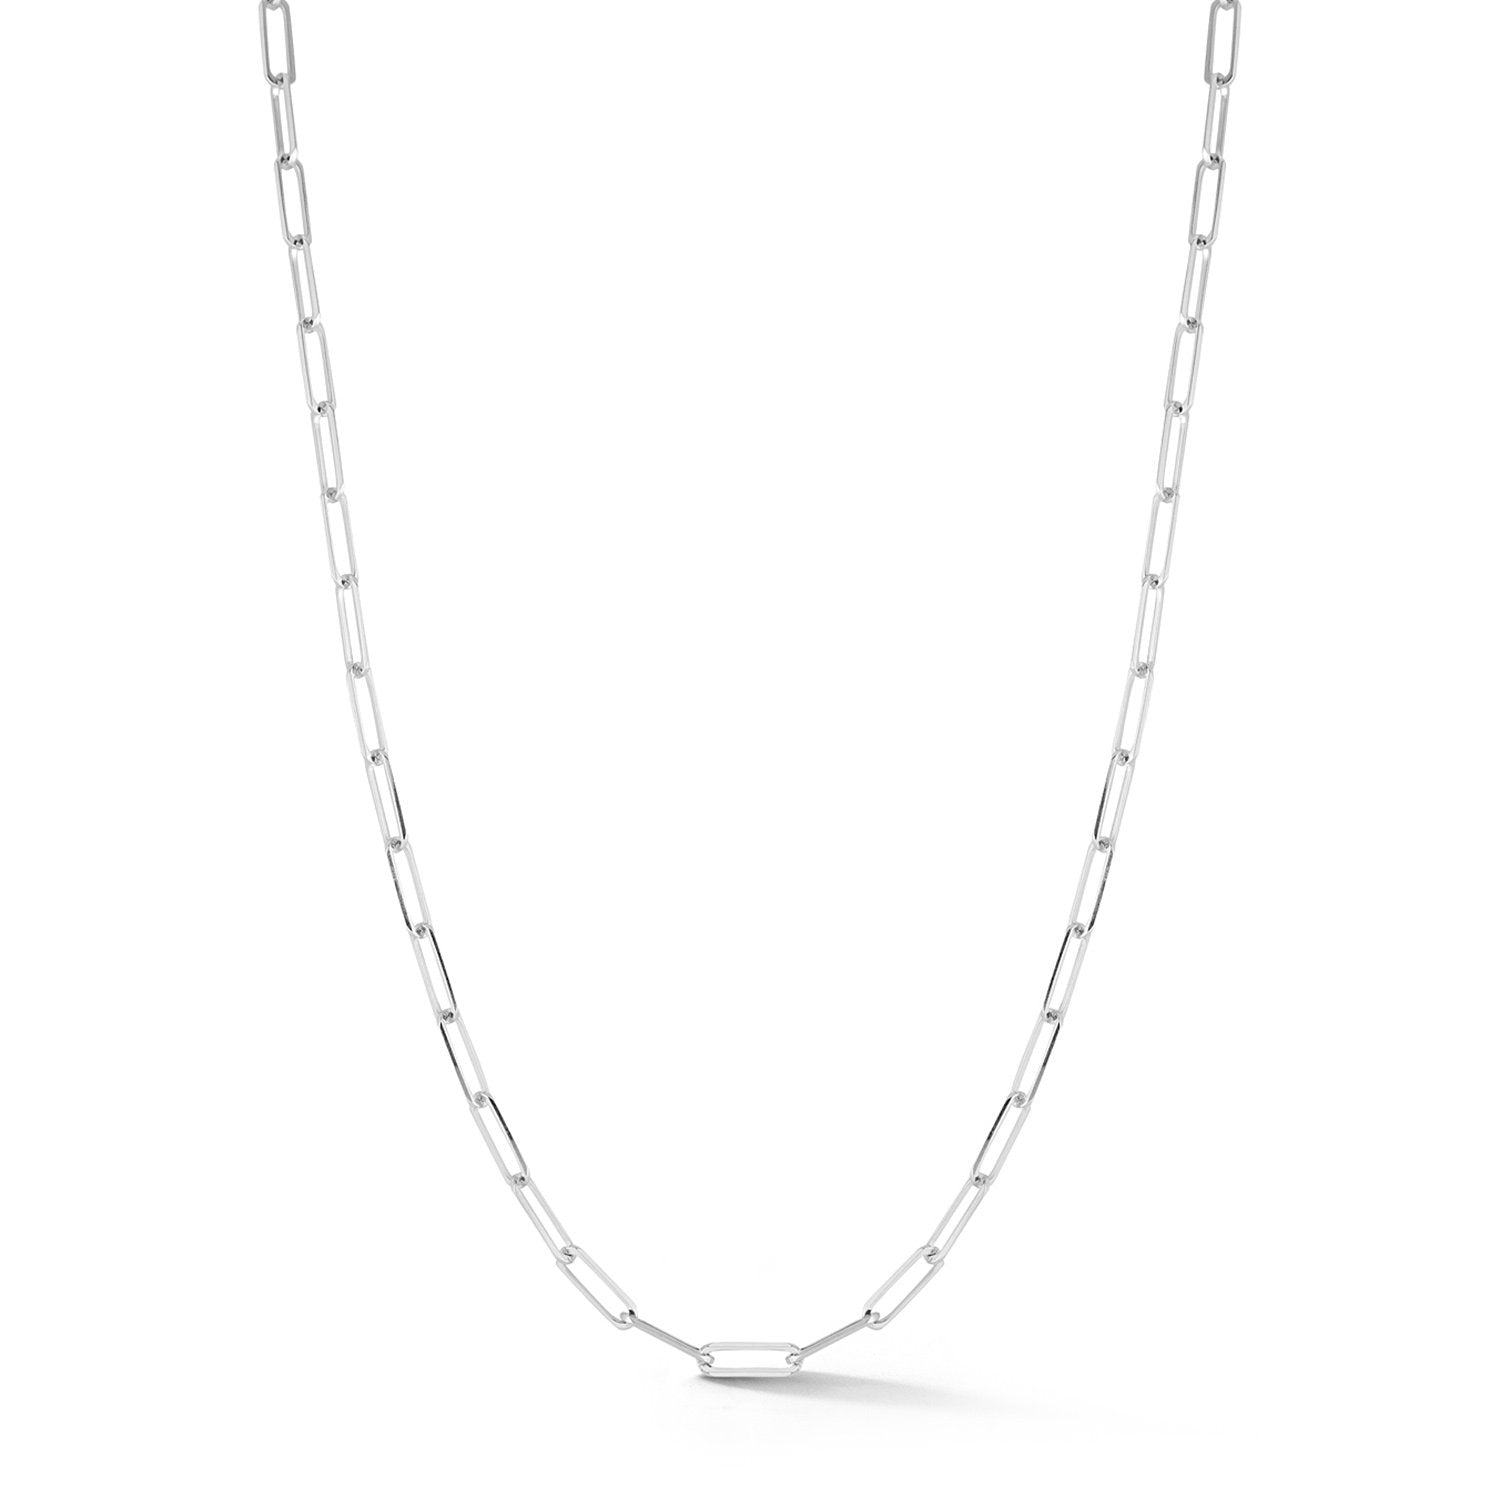 Betty Gold Chain Link Necklace in 18K White Gold